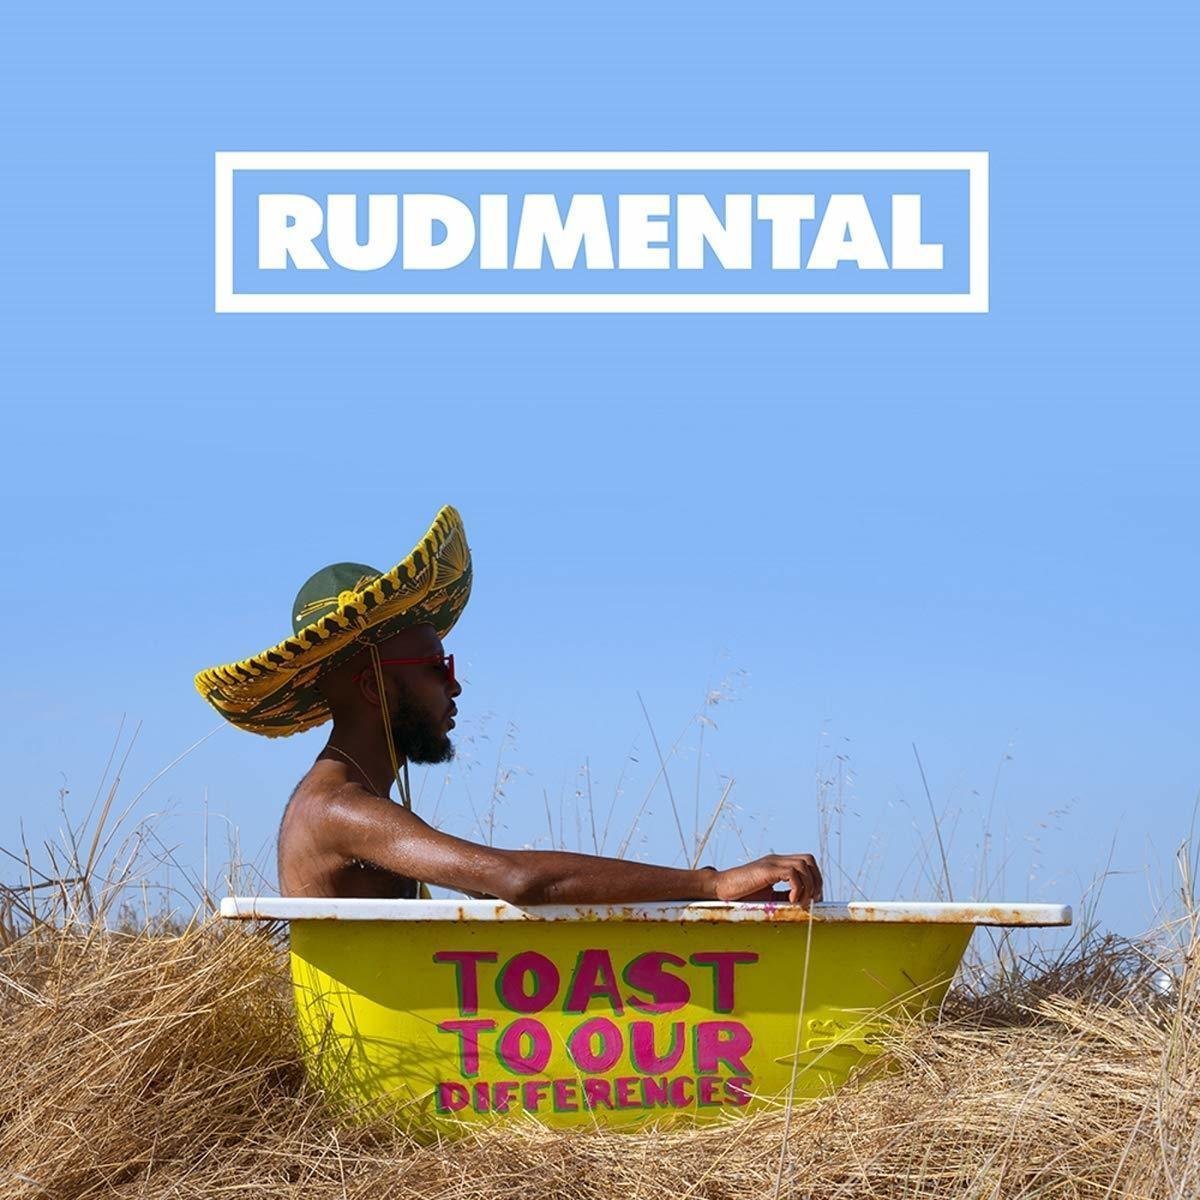 Rudimental - Toast To Our Differences (LP) Rudimental